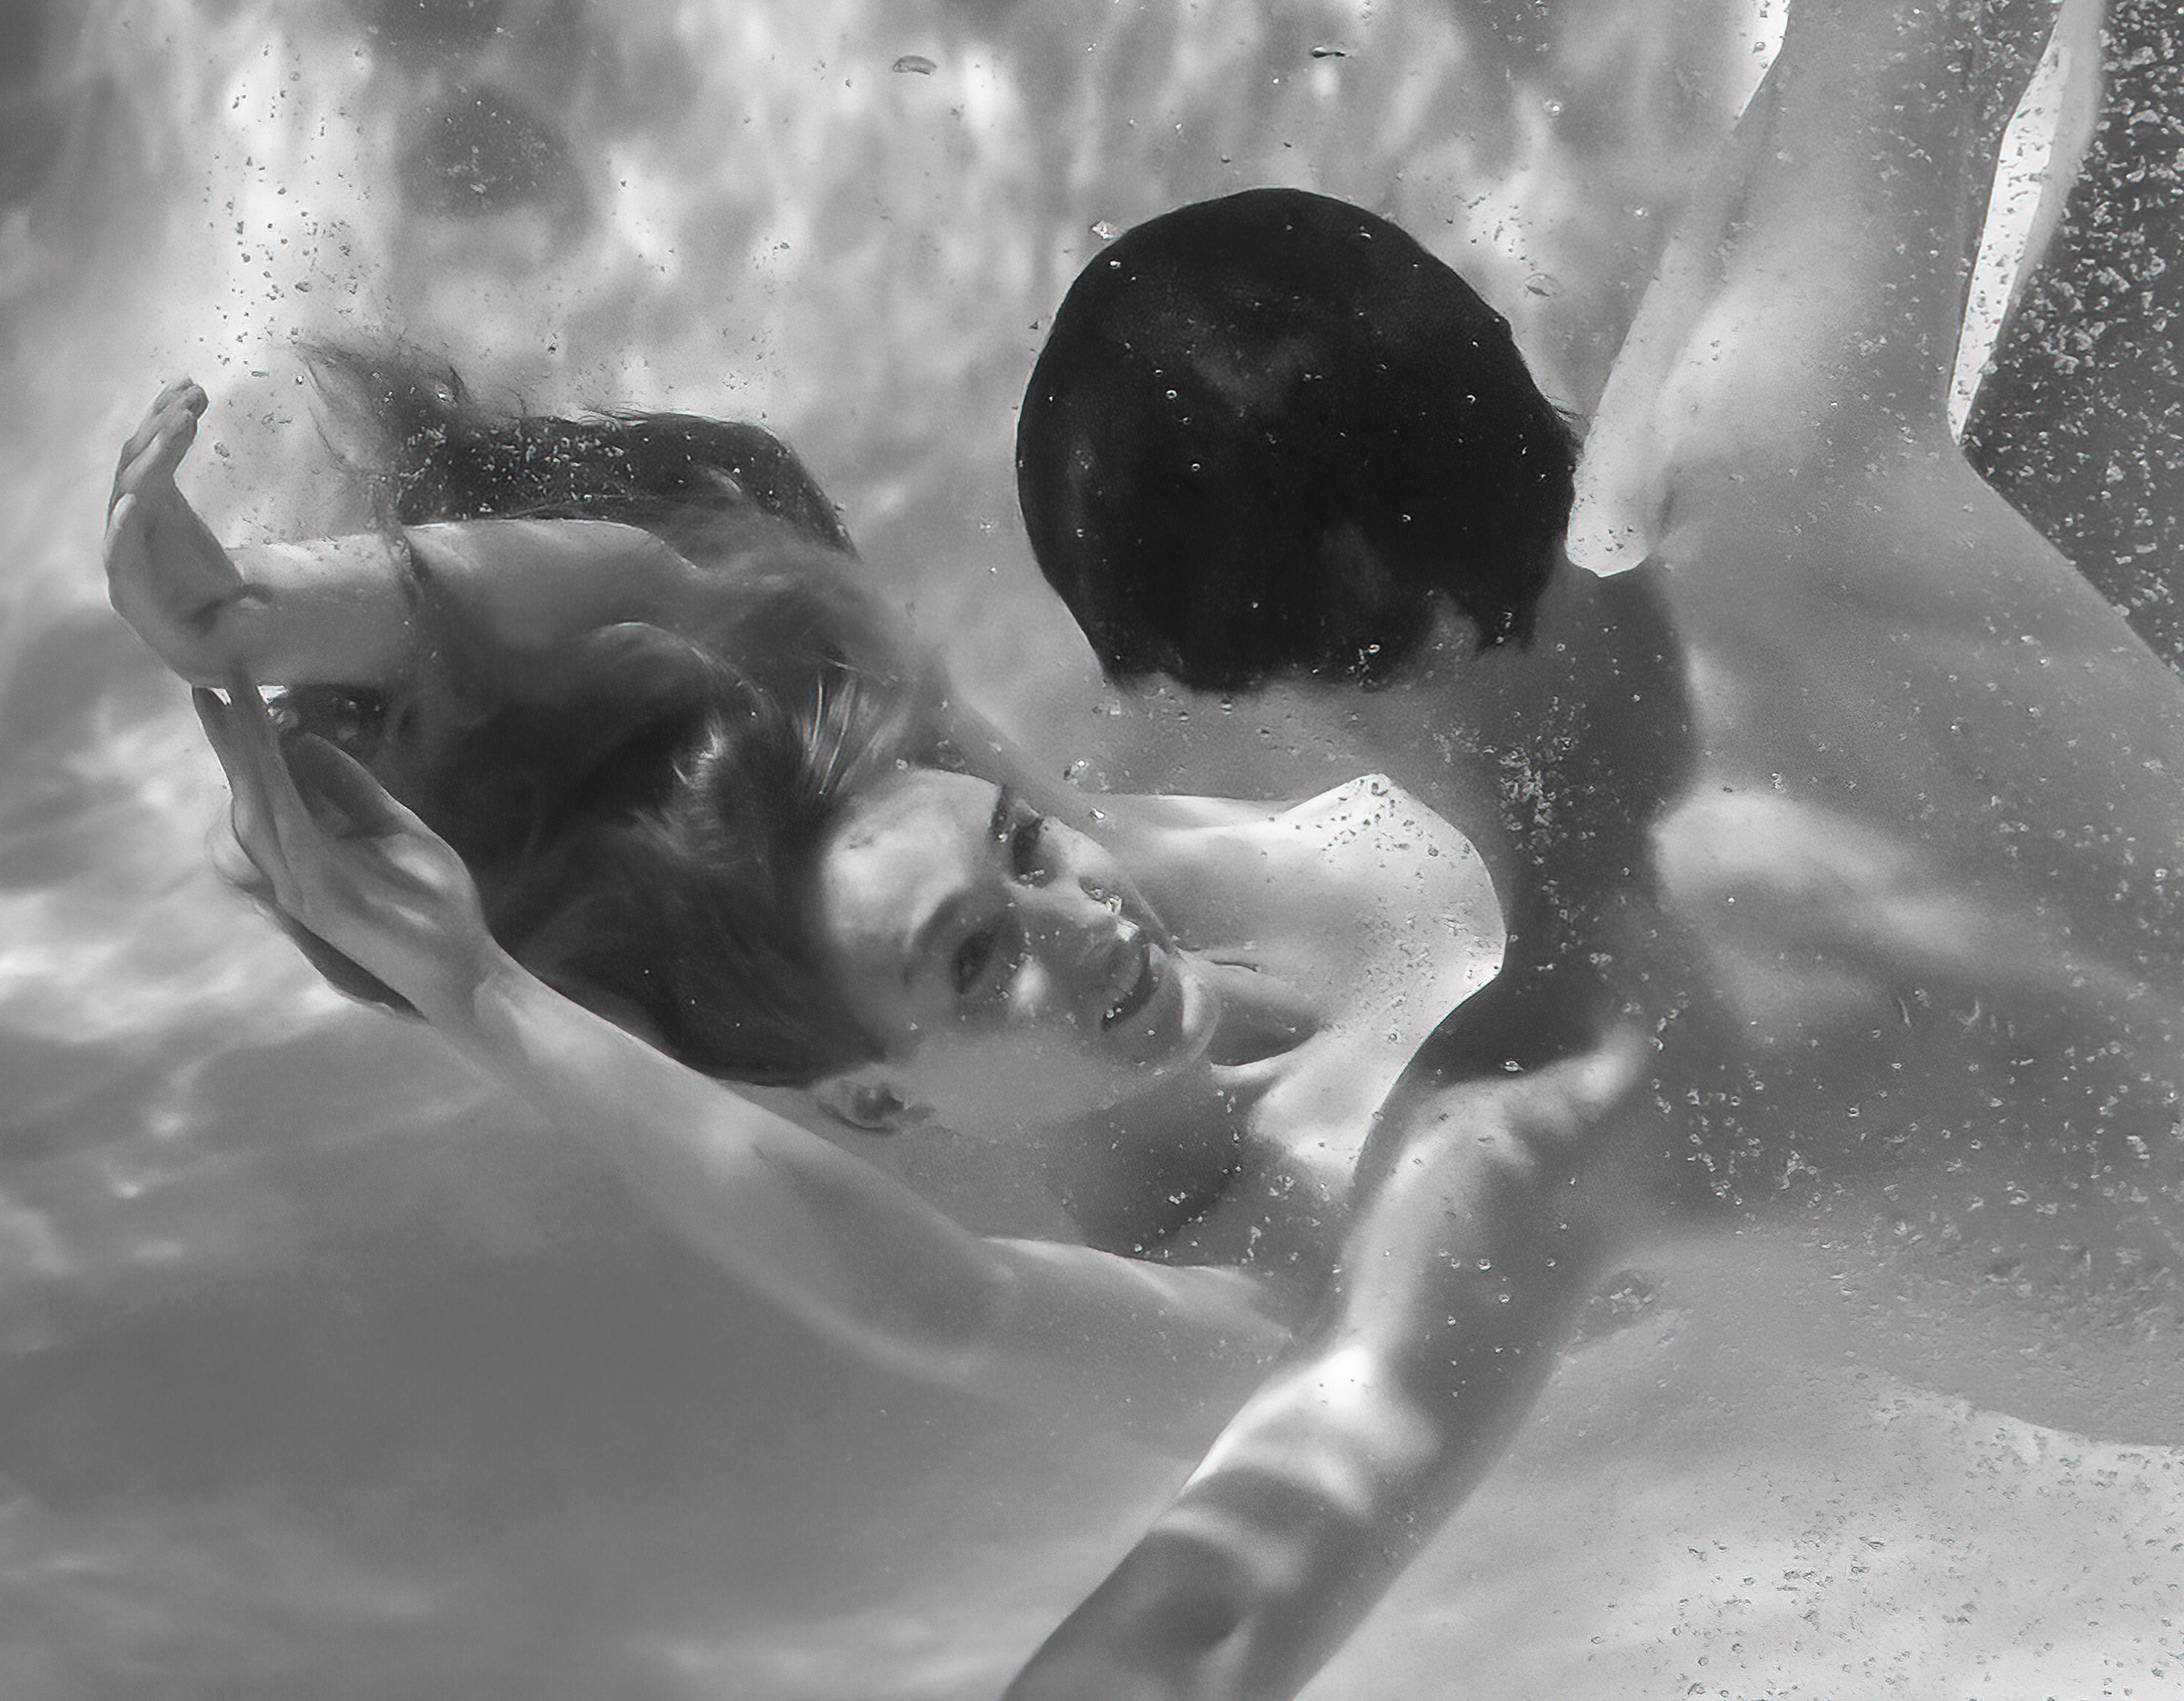 Pool Party VII  - underwater black & white photograph - print on paper 36